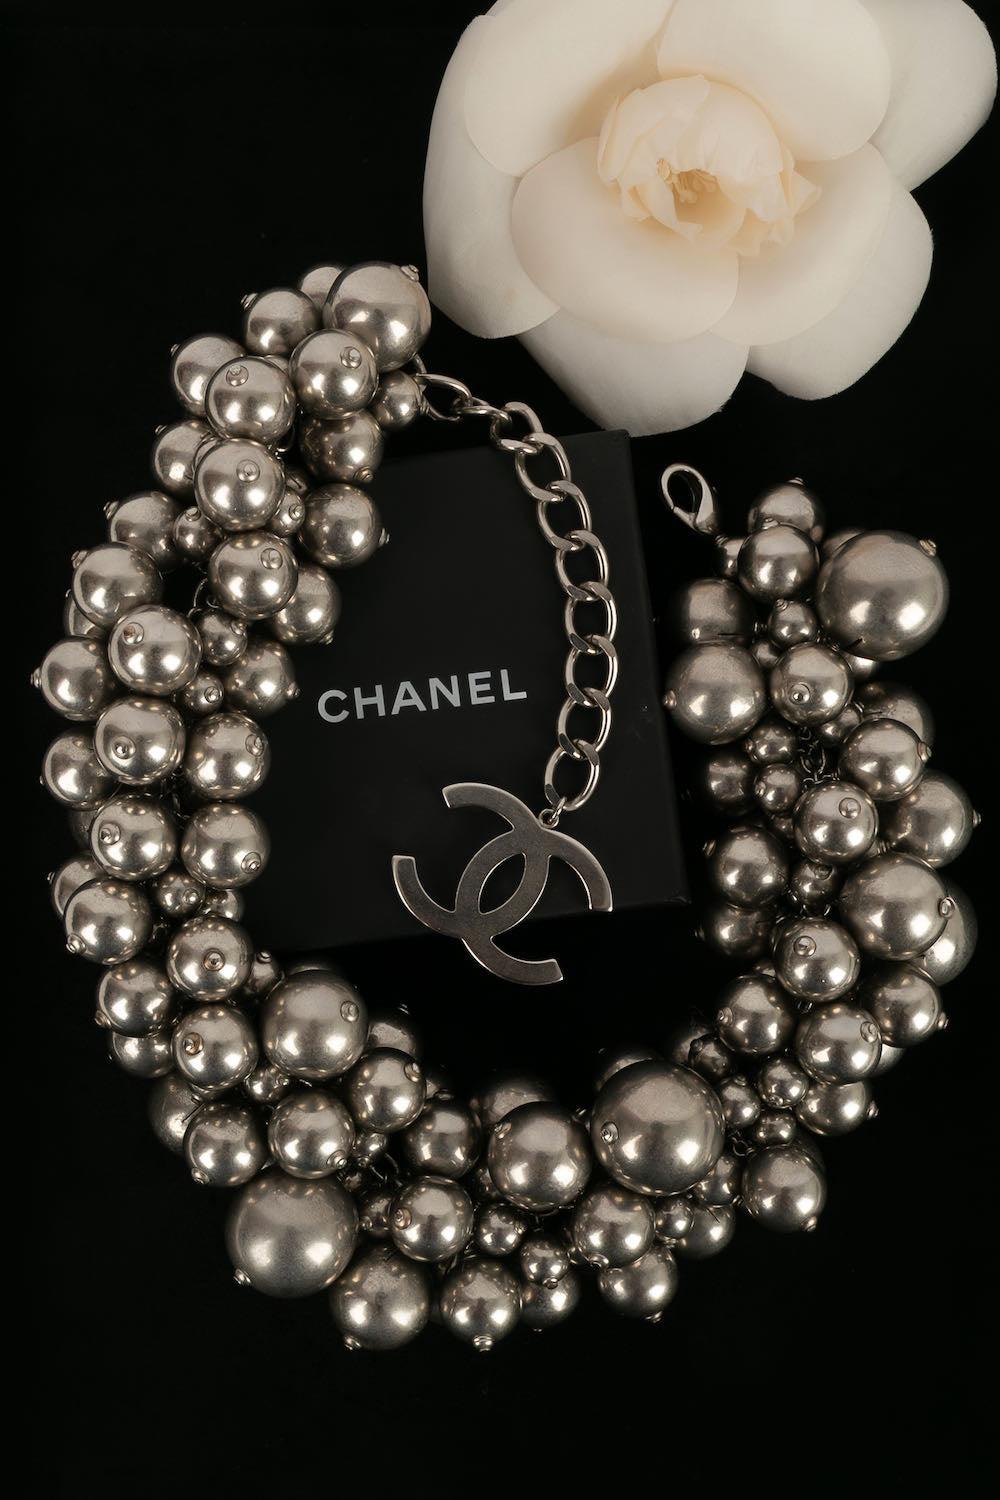 Chanel Necklace in Silver Metal Spheres For Sale 3